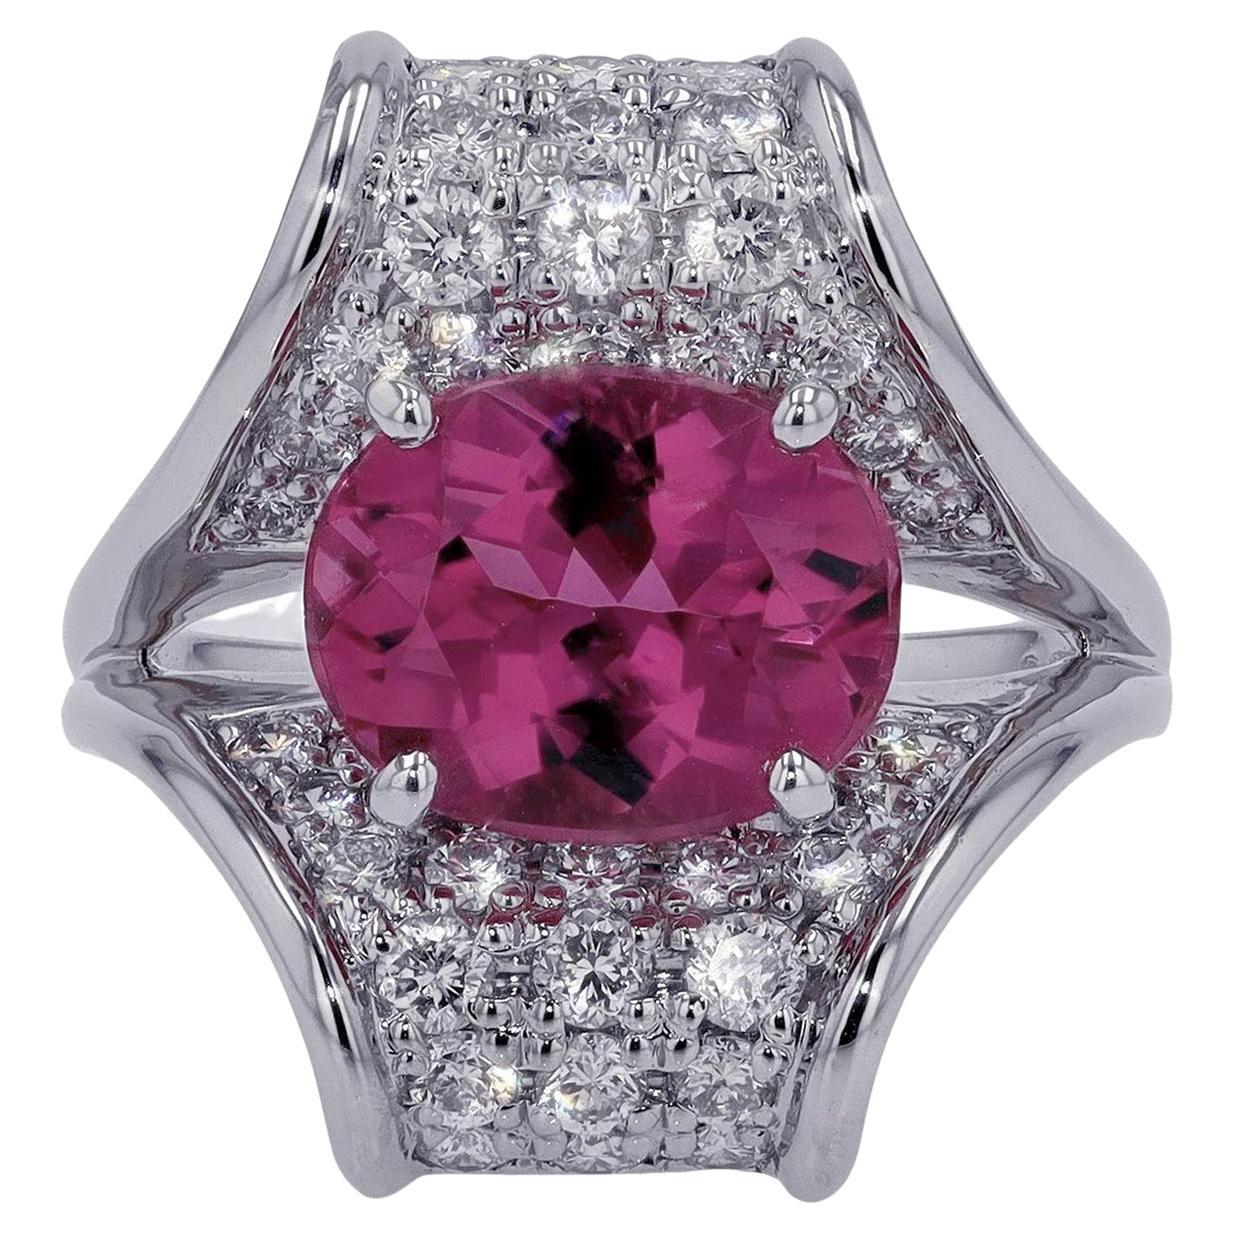 A bright and lively rubellite tourmaline commands the spotlight in this intriguing Mid Century cocktail ring. The platinum setting resembling a budding flower adorned with sparkling, pave' set diamonds can be worn as a dreamy gemstone engagement